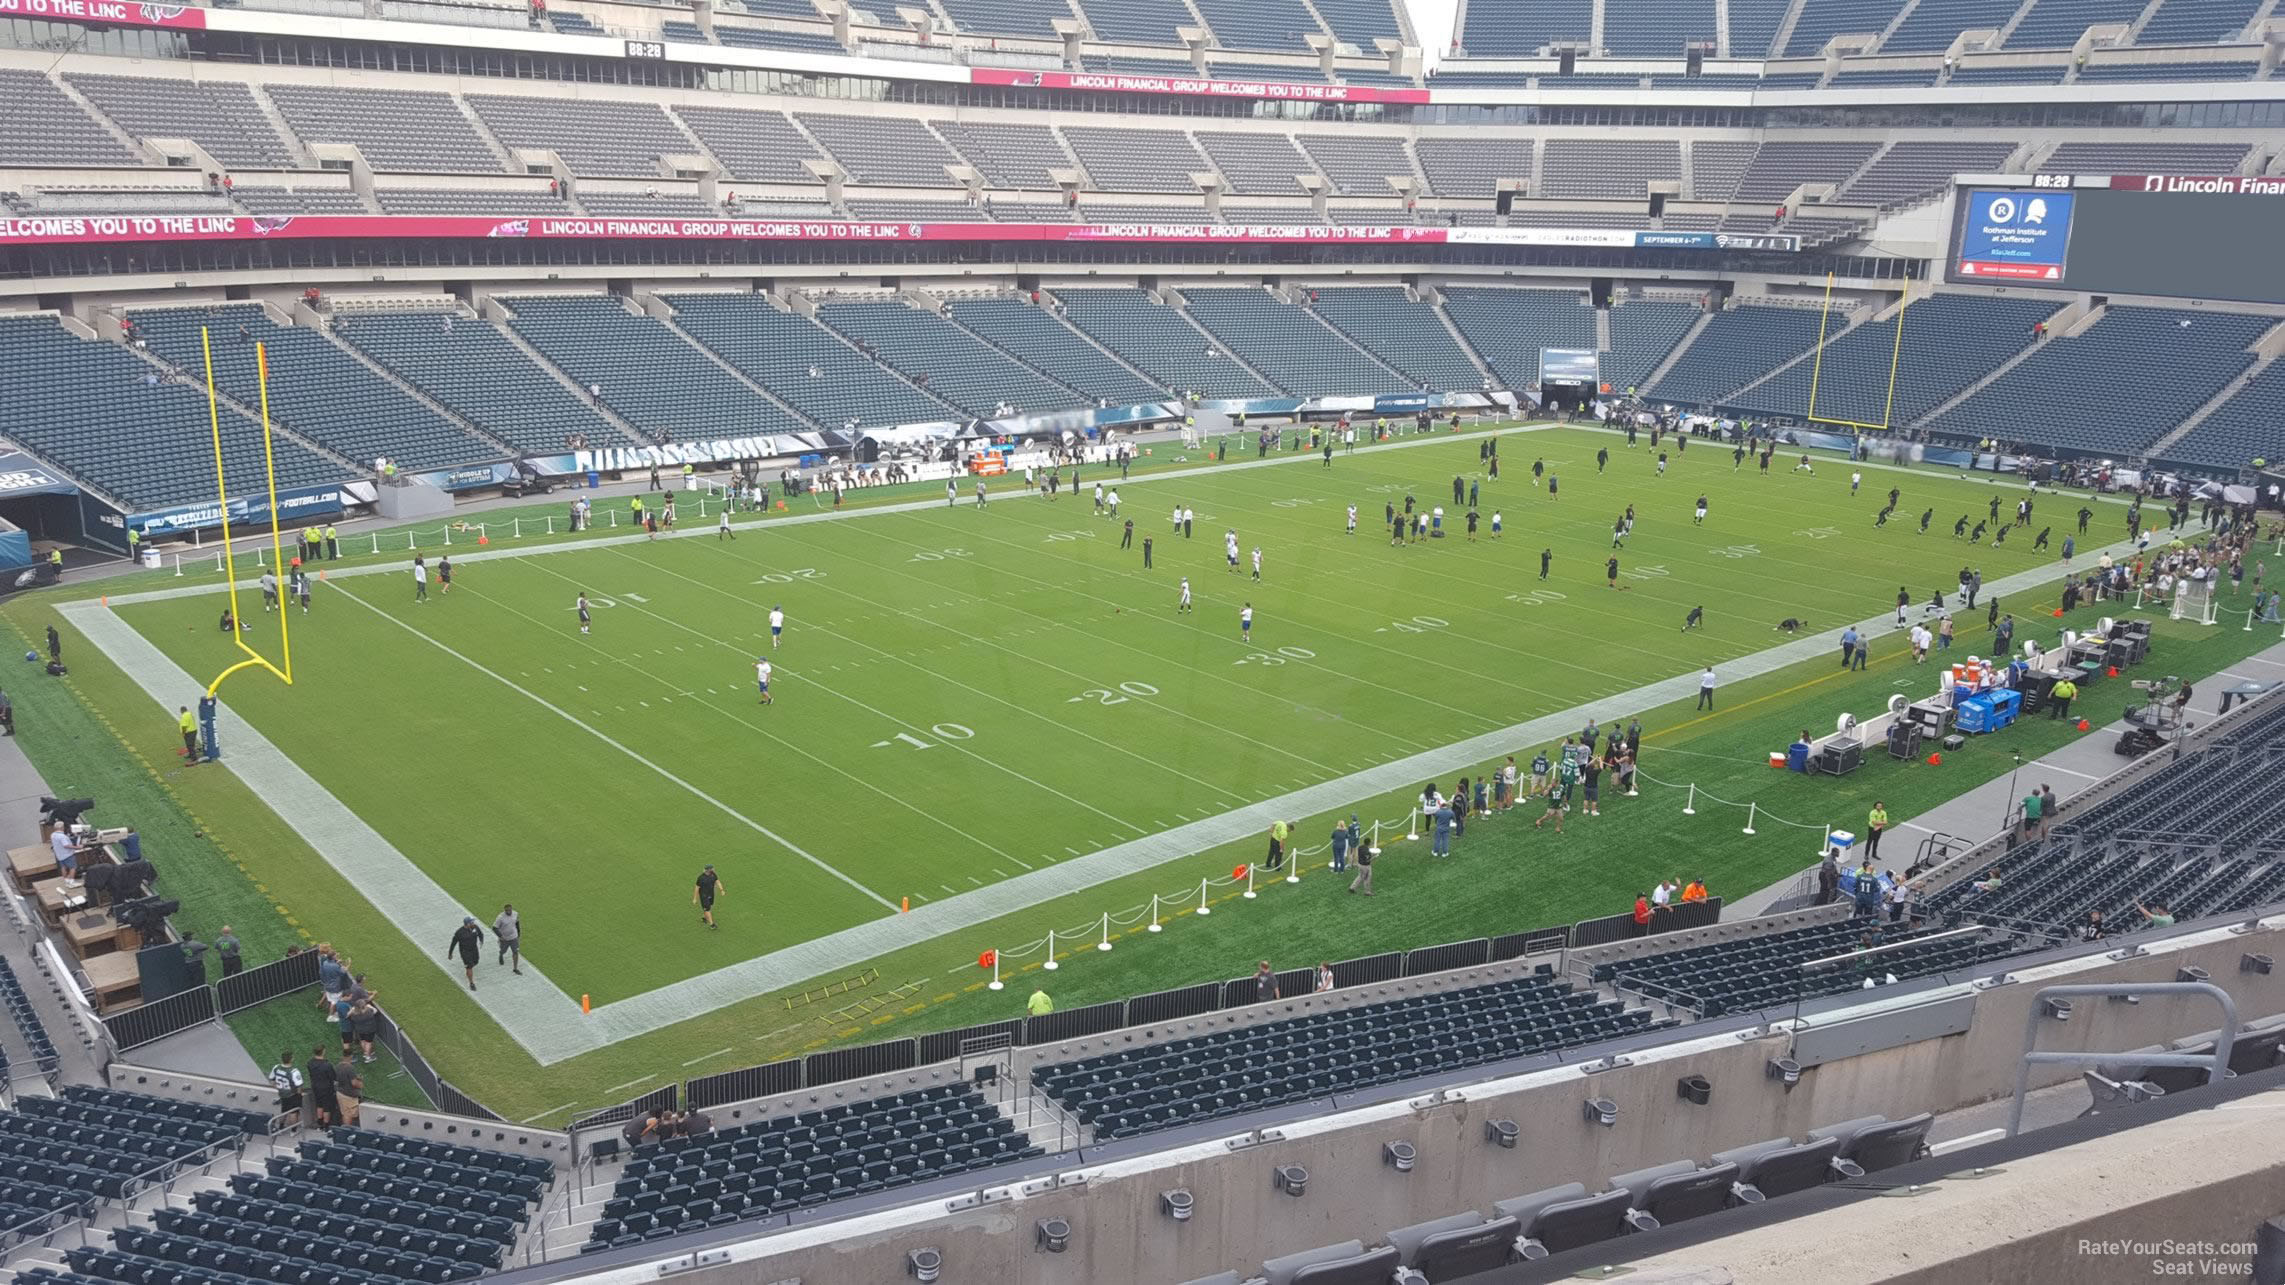 section c35, row 7 seat view  for football - lincoln financial field